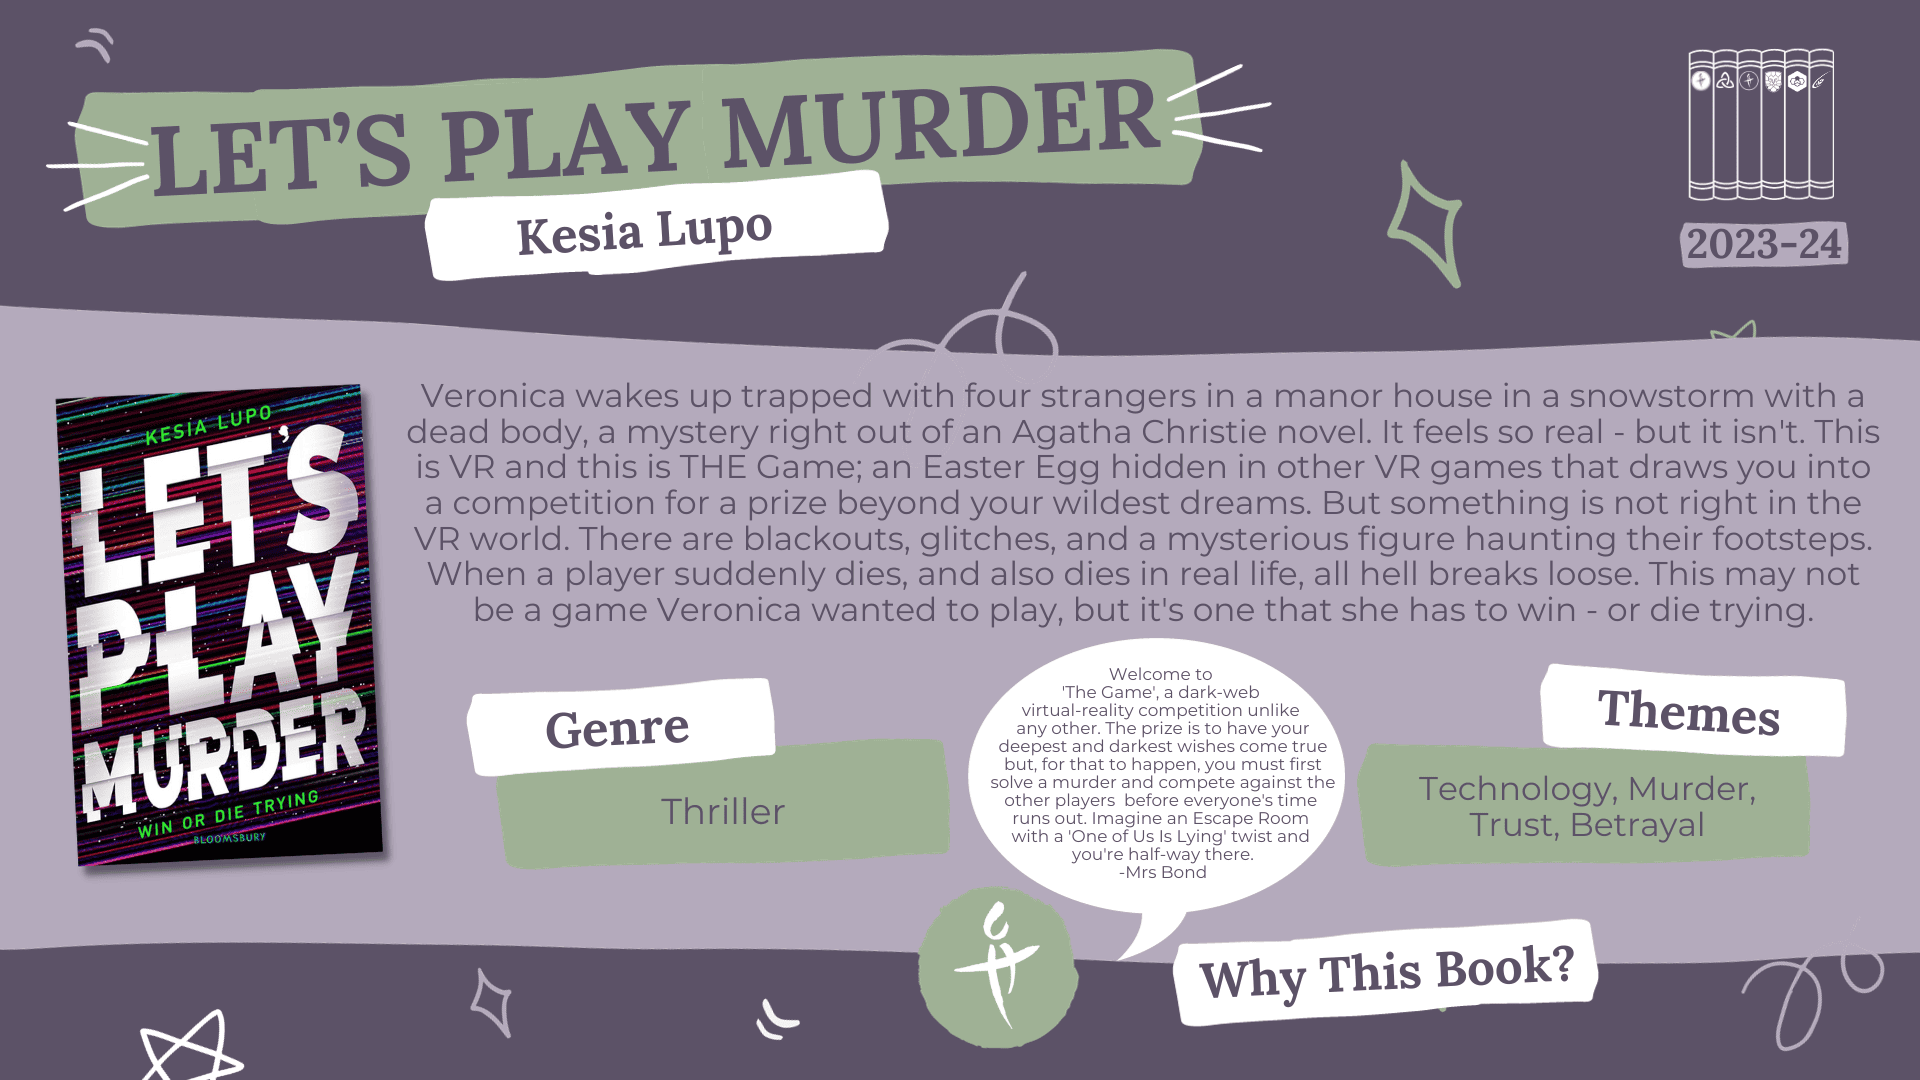  A fact card about a book nominated for the Laurus Trust Libraries Book Award 2023-2024: Let's Play Murder by Kesia Lupo Blurb reads: Veronica wakes up trapped with four strangers in a manor house in a snowstorm with a dead body, a mystery right out of an Agatha Christie novel. It feels so real - but it isn't. This is VR and this is THE Game; an Easter Egg hidden in other VR games that draws you into a competition for a prize beyond your wildest dreams. But something is not right in the VR world. There are blackouts, glitches, and a mysterious figure haunting their footsteps. When a player suddenly dies, and also dies in real life, all hell breaks loose. This may not be a game Veronica wanted to play, but it's one that she has to win - or die trying. Genre: Thriller Themes: Technology, Murder, Trust, Betrayal Why this book? Welcome to 'The Game', a dark web virtual reality competition unlike any other. The prize is to have your deepest and darkest wishes come true but, for that to happen, you must first solve a murder and compete against the other players before everyone's time runs out. Imagine an Escape Room with a 'One of Us is Lying' twist and you're half-way there. - Mrs Bond (CHHS)